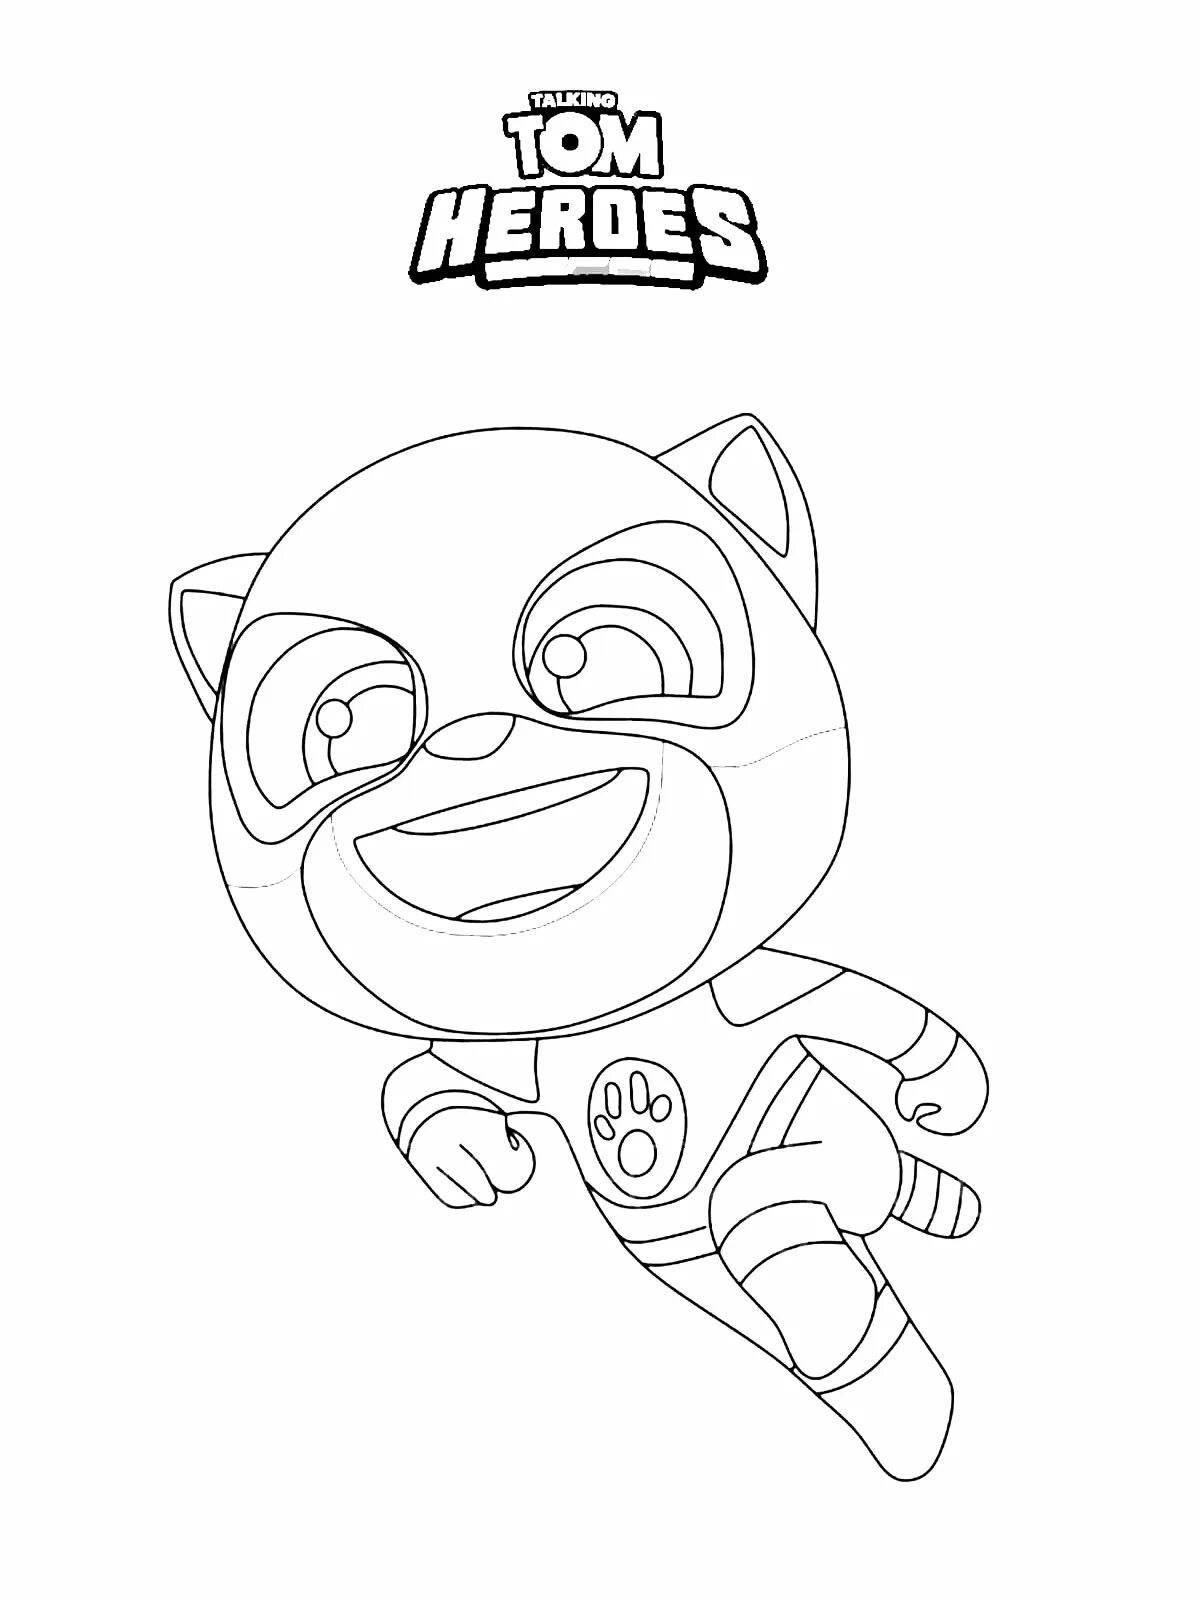 Sweet super bear coloring page